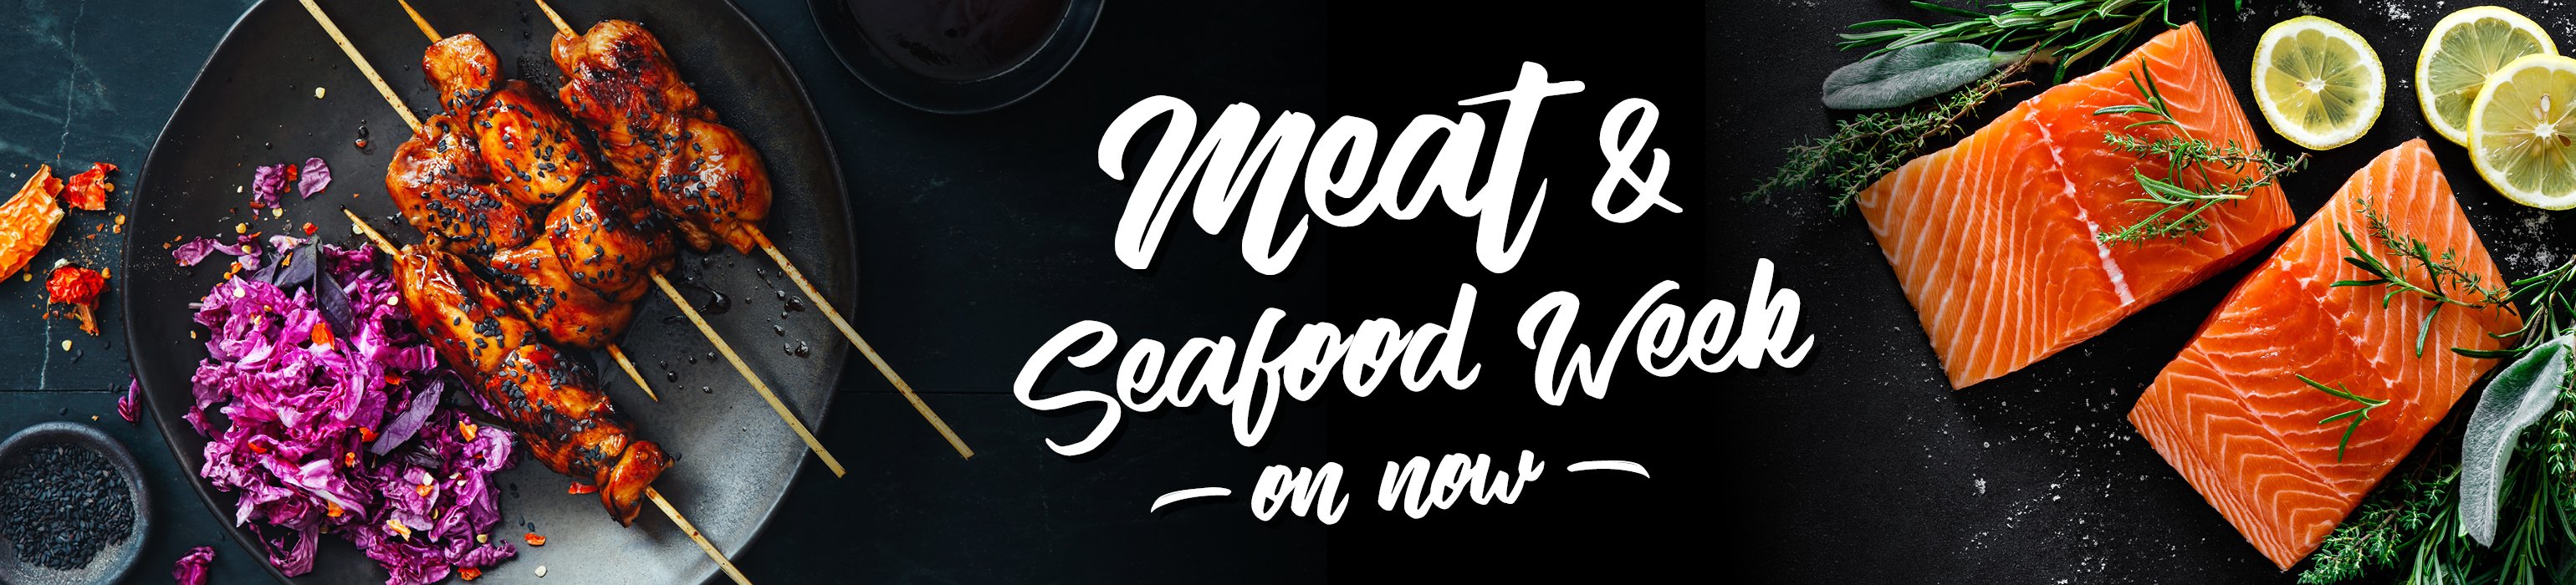 Meat & Seafood week on now